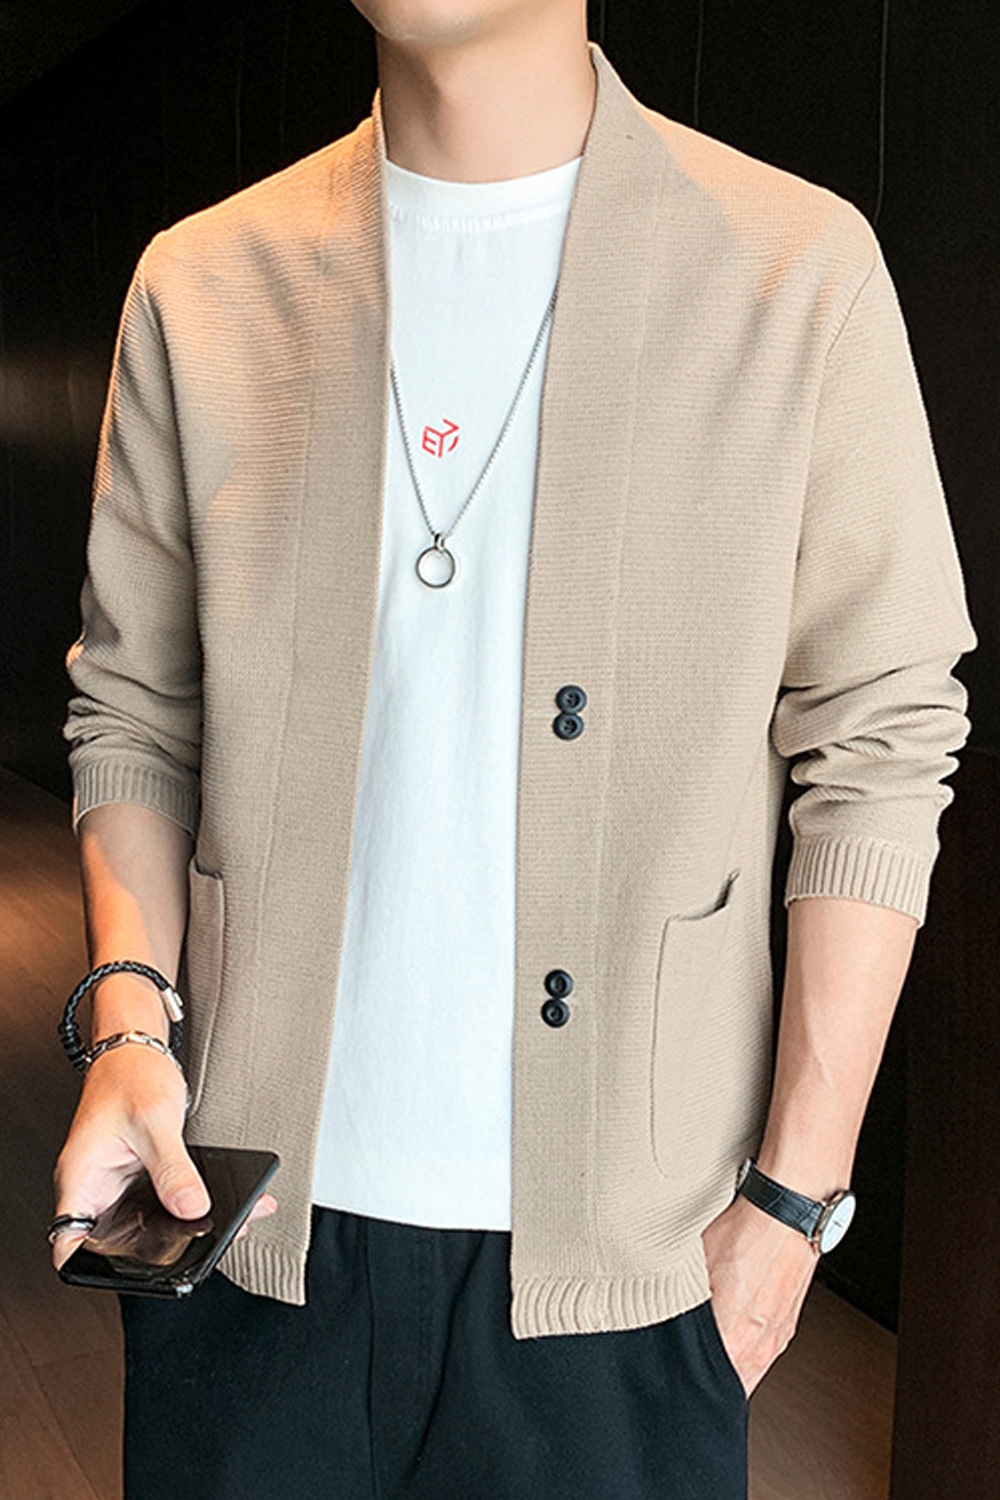 Unomatch Men Loose Solid Pattern Long Sleeve Warm Winter Outing & Casual Amazing Cardigan